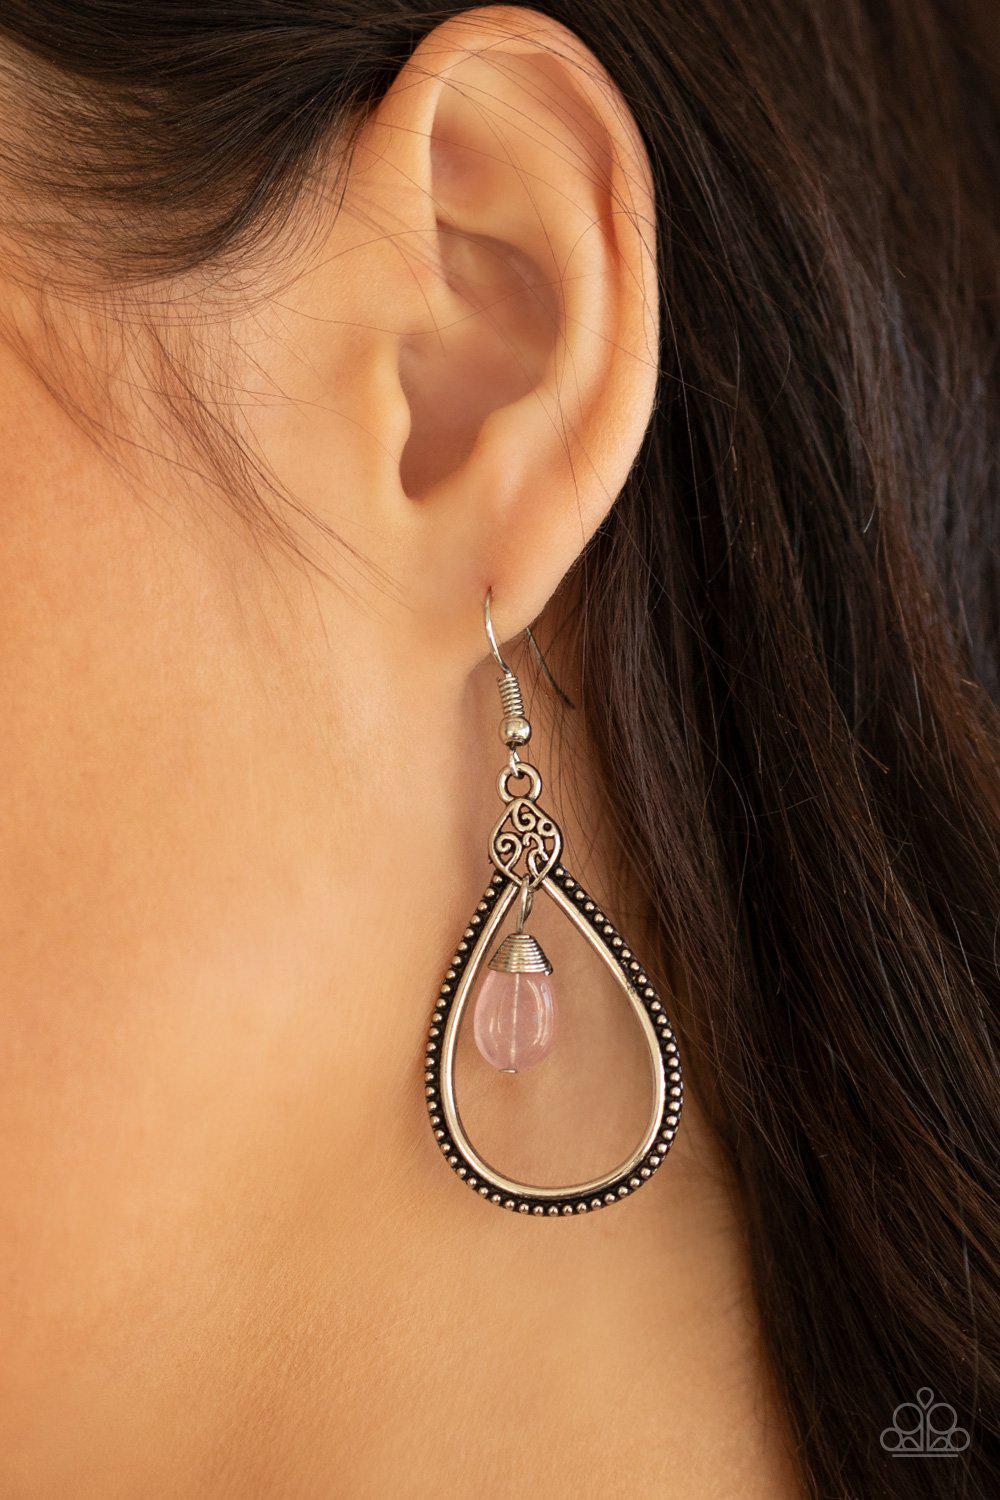 I'll Believe It ZEN I See It Pink Earrings - Paparazzi Accessories- lightbox - CarasShop.com - $5 Jewelry by Cara Jewels